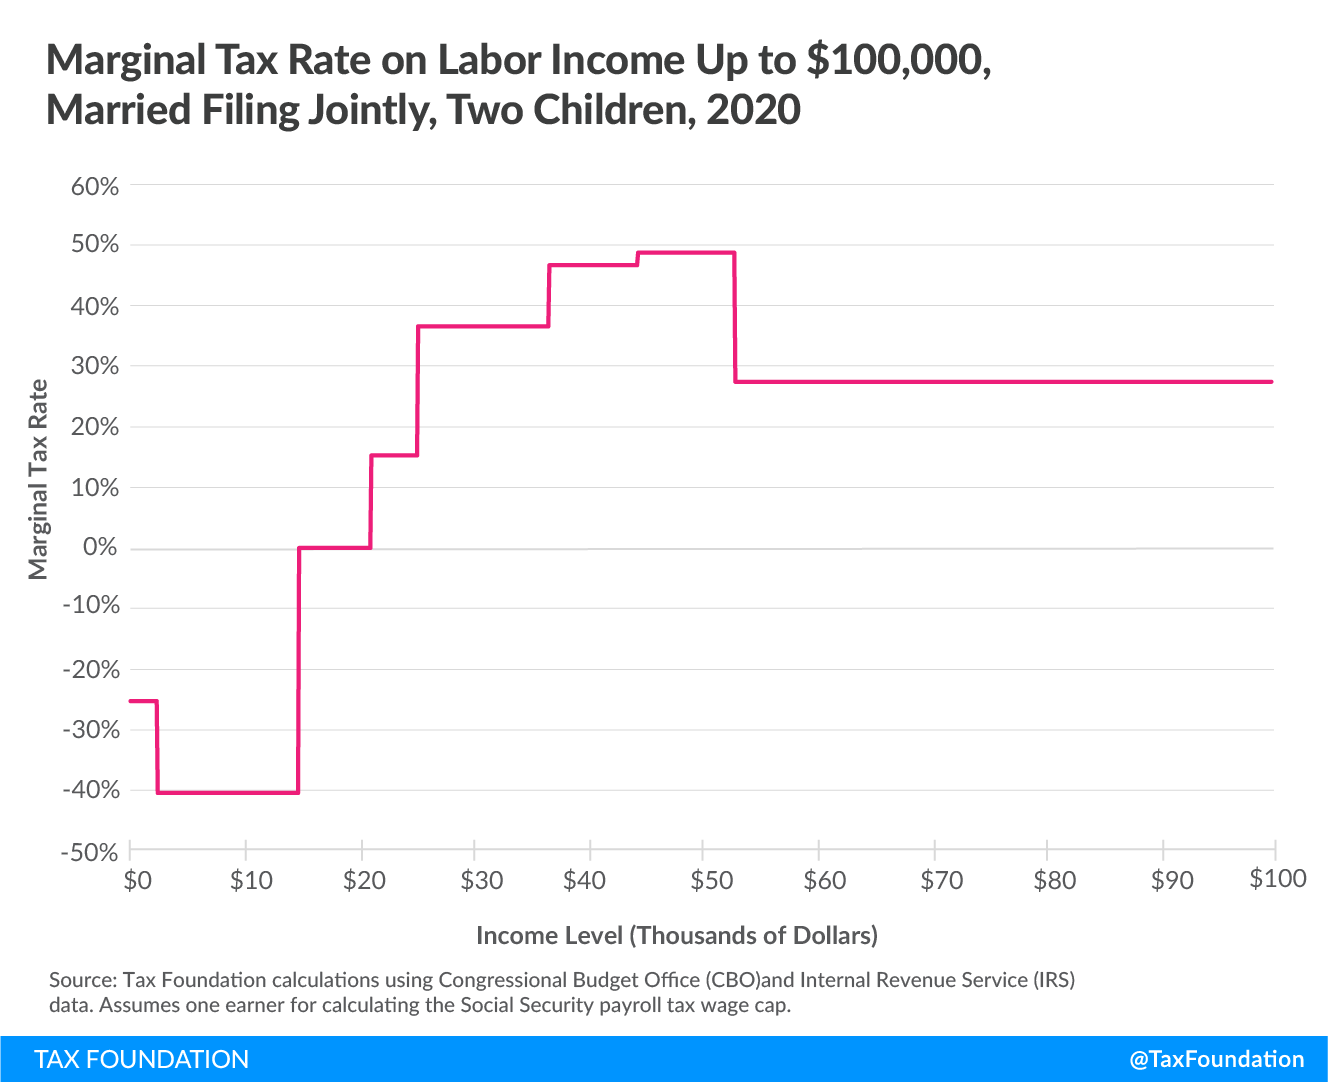 Marginal tax rate on labor income up to $100,000 married filing jointly, two children, 2020, Marginal Tax Rates on Labor Income in the U.S. After the Tax Cuts and Jobs Act 